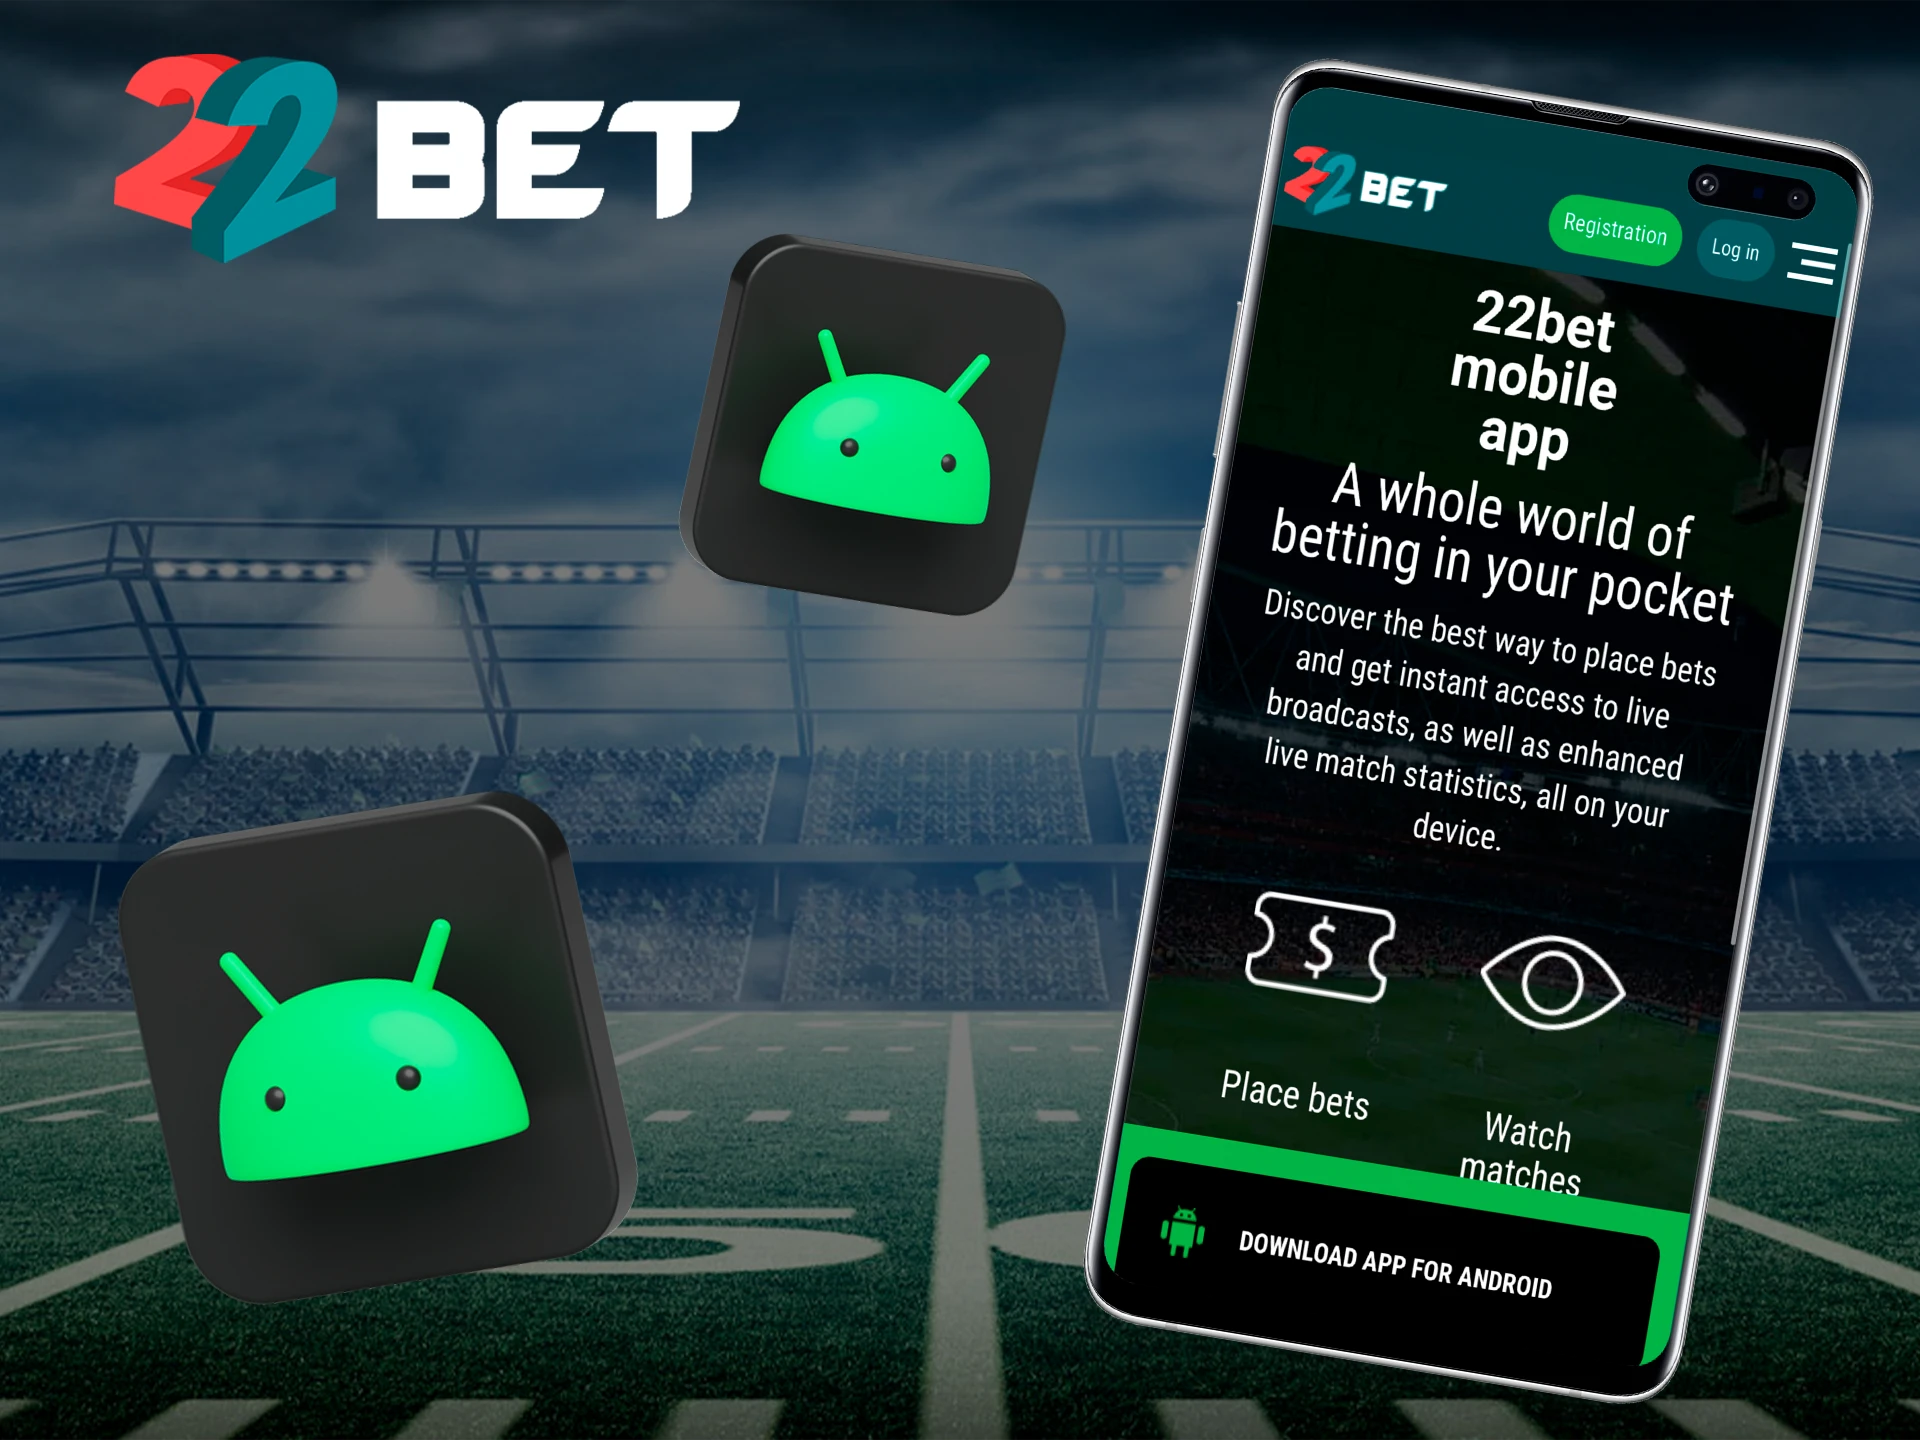 Install the 22Bet app on your Android device.